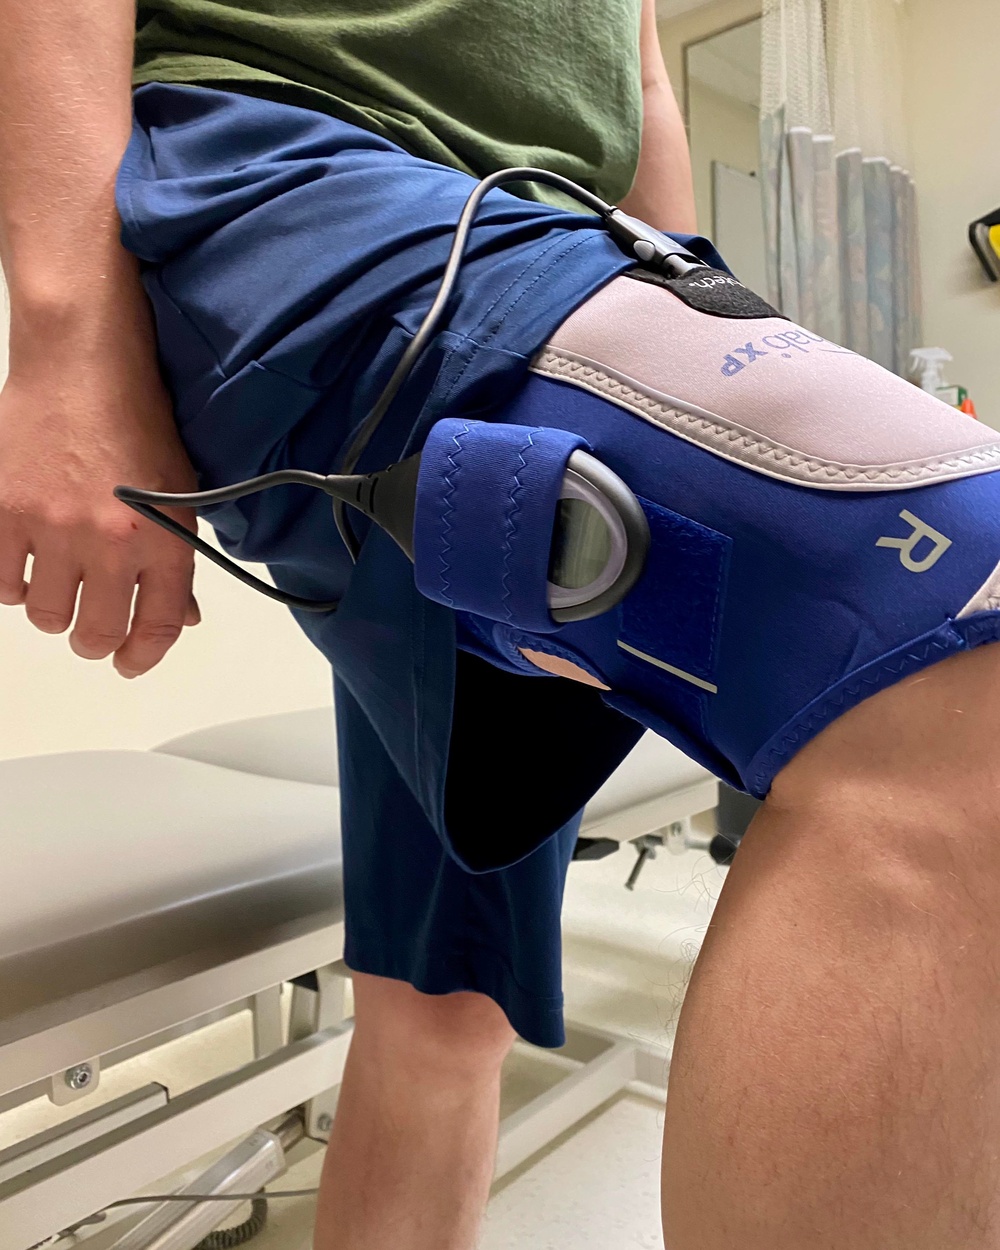 BACH physical therapists' research on knee pain may aid recovery